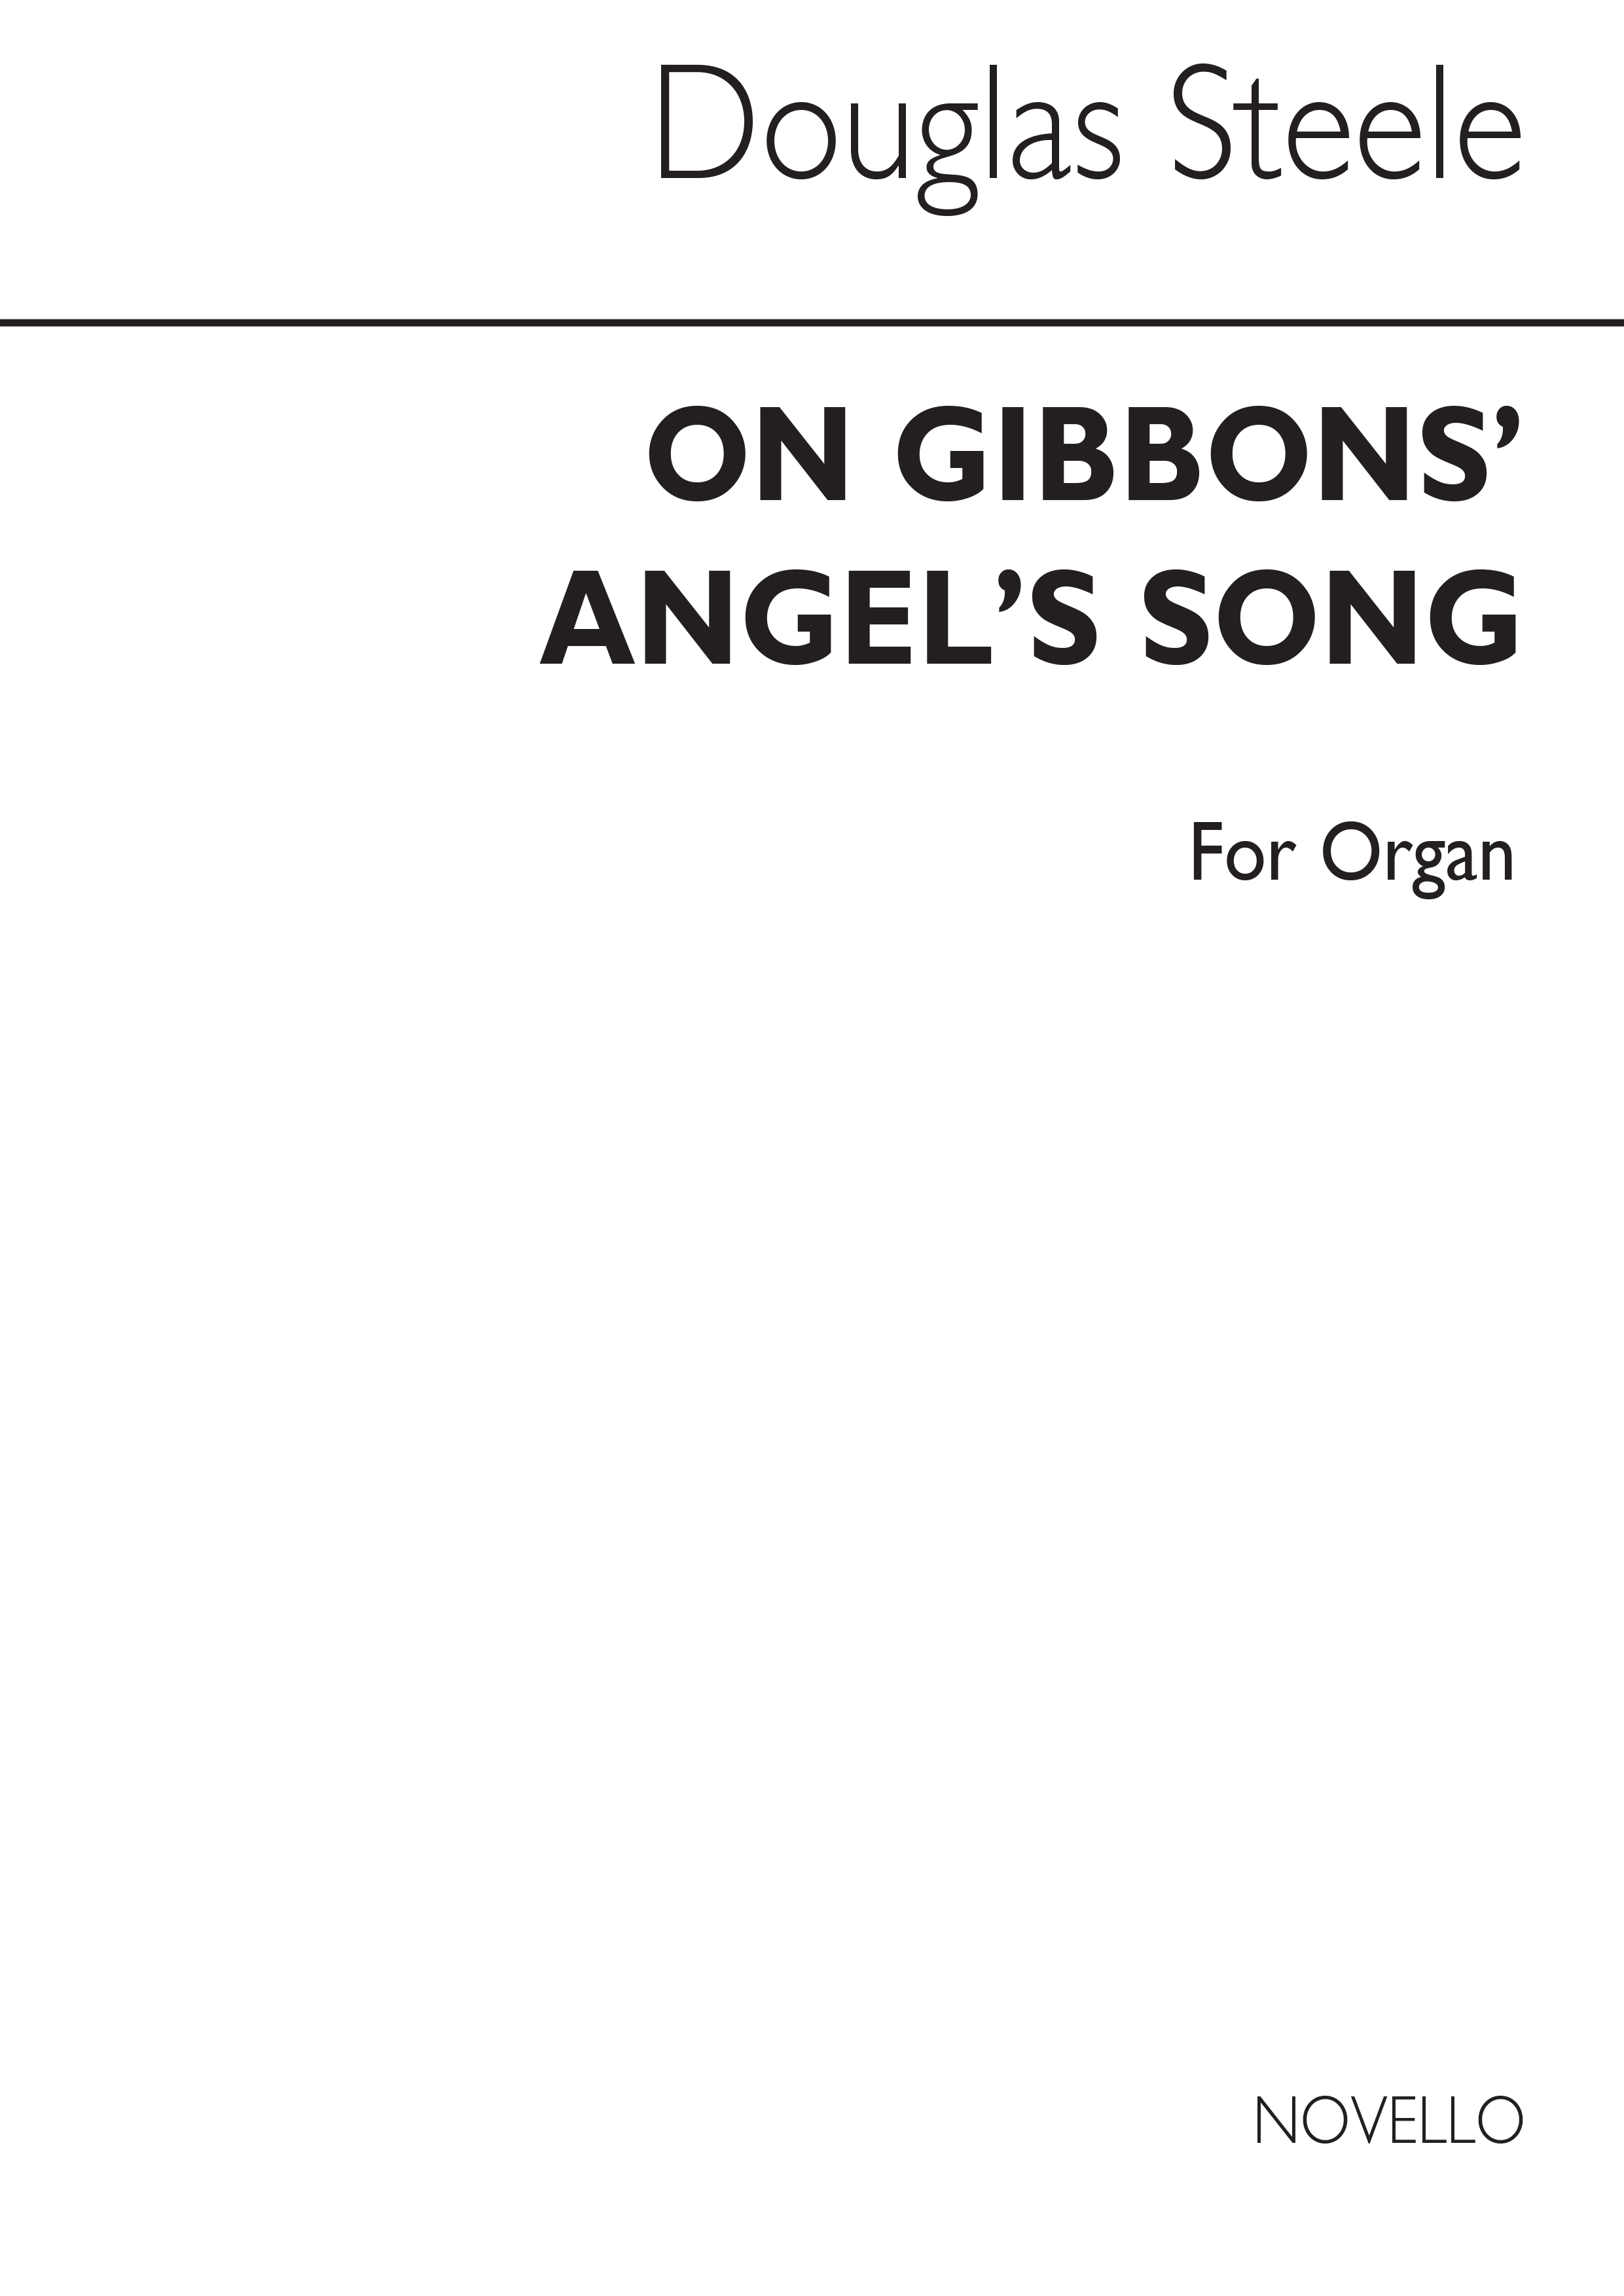 Douglas Steele: On Gibbons' Angel's Song (Chorale Prelude) Organ